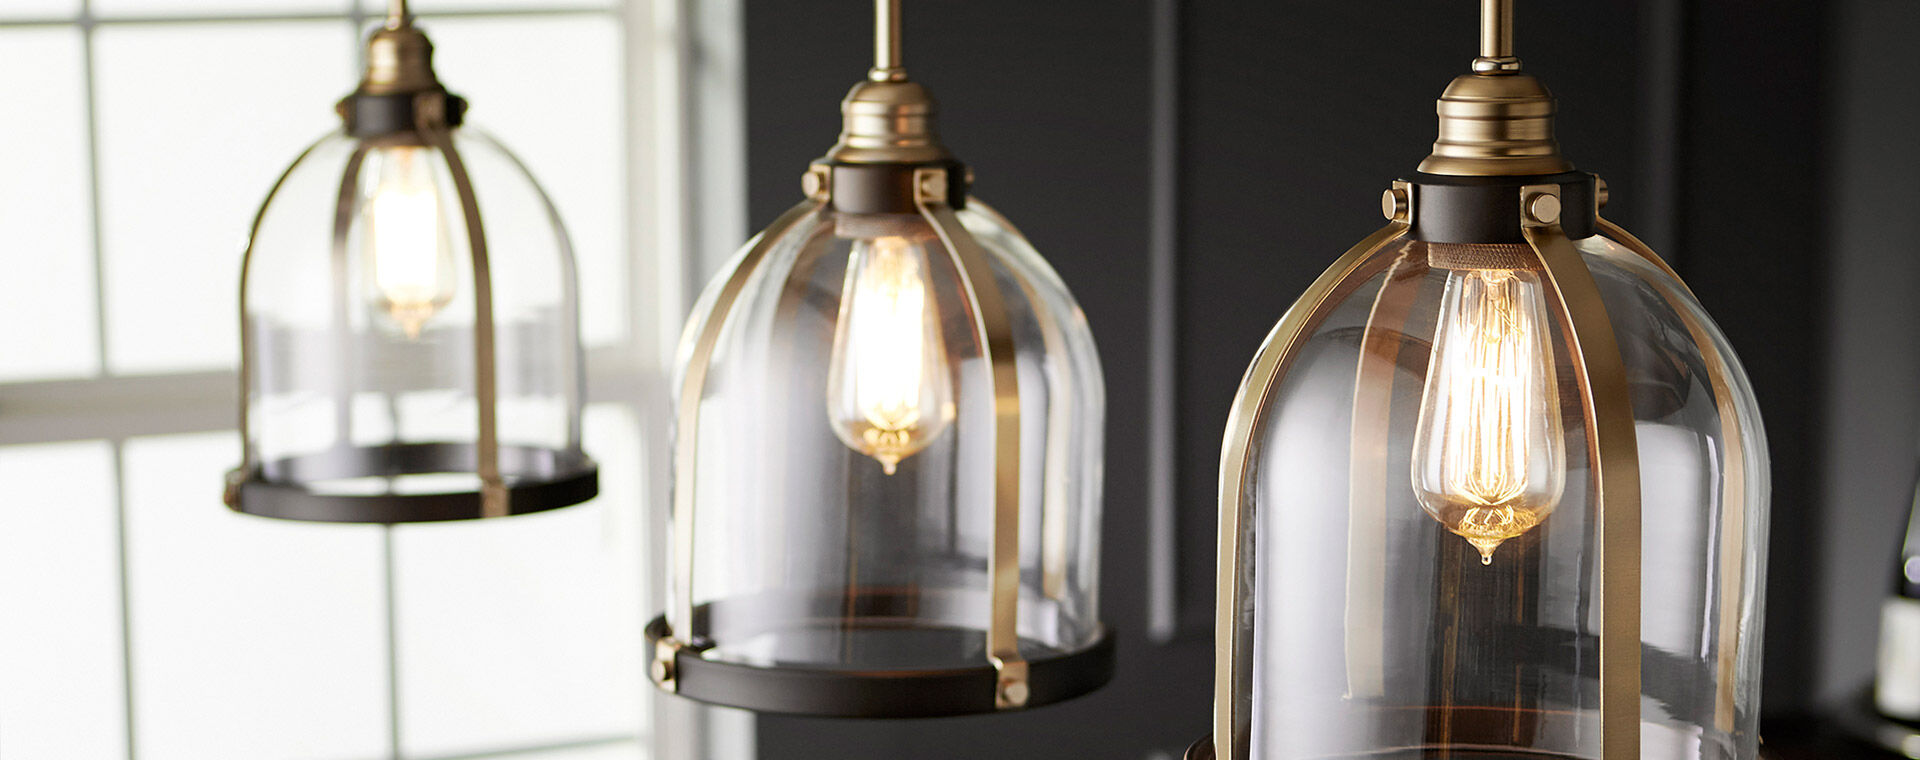 Decorate with Light | Let your personality shine throughout your home.